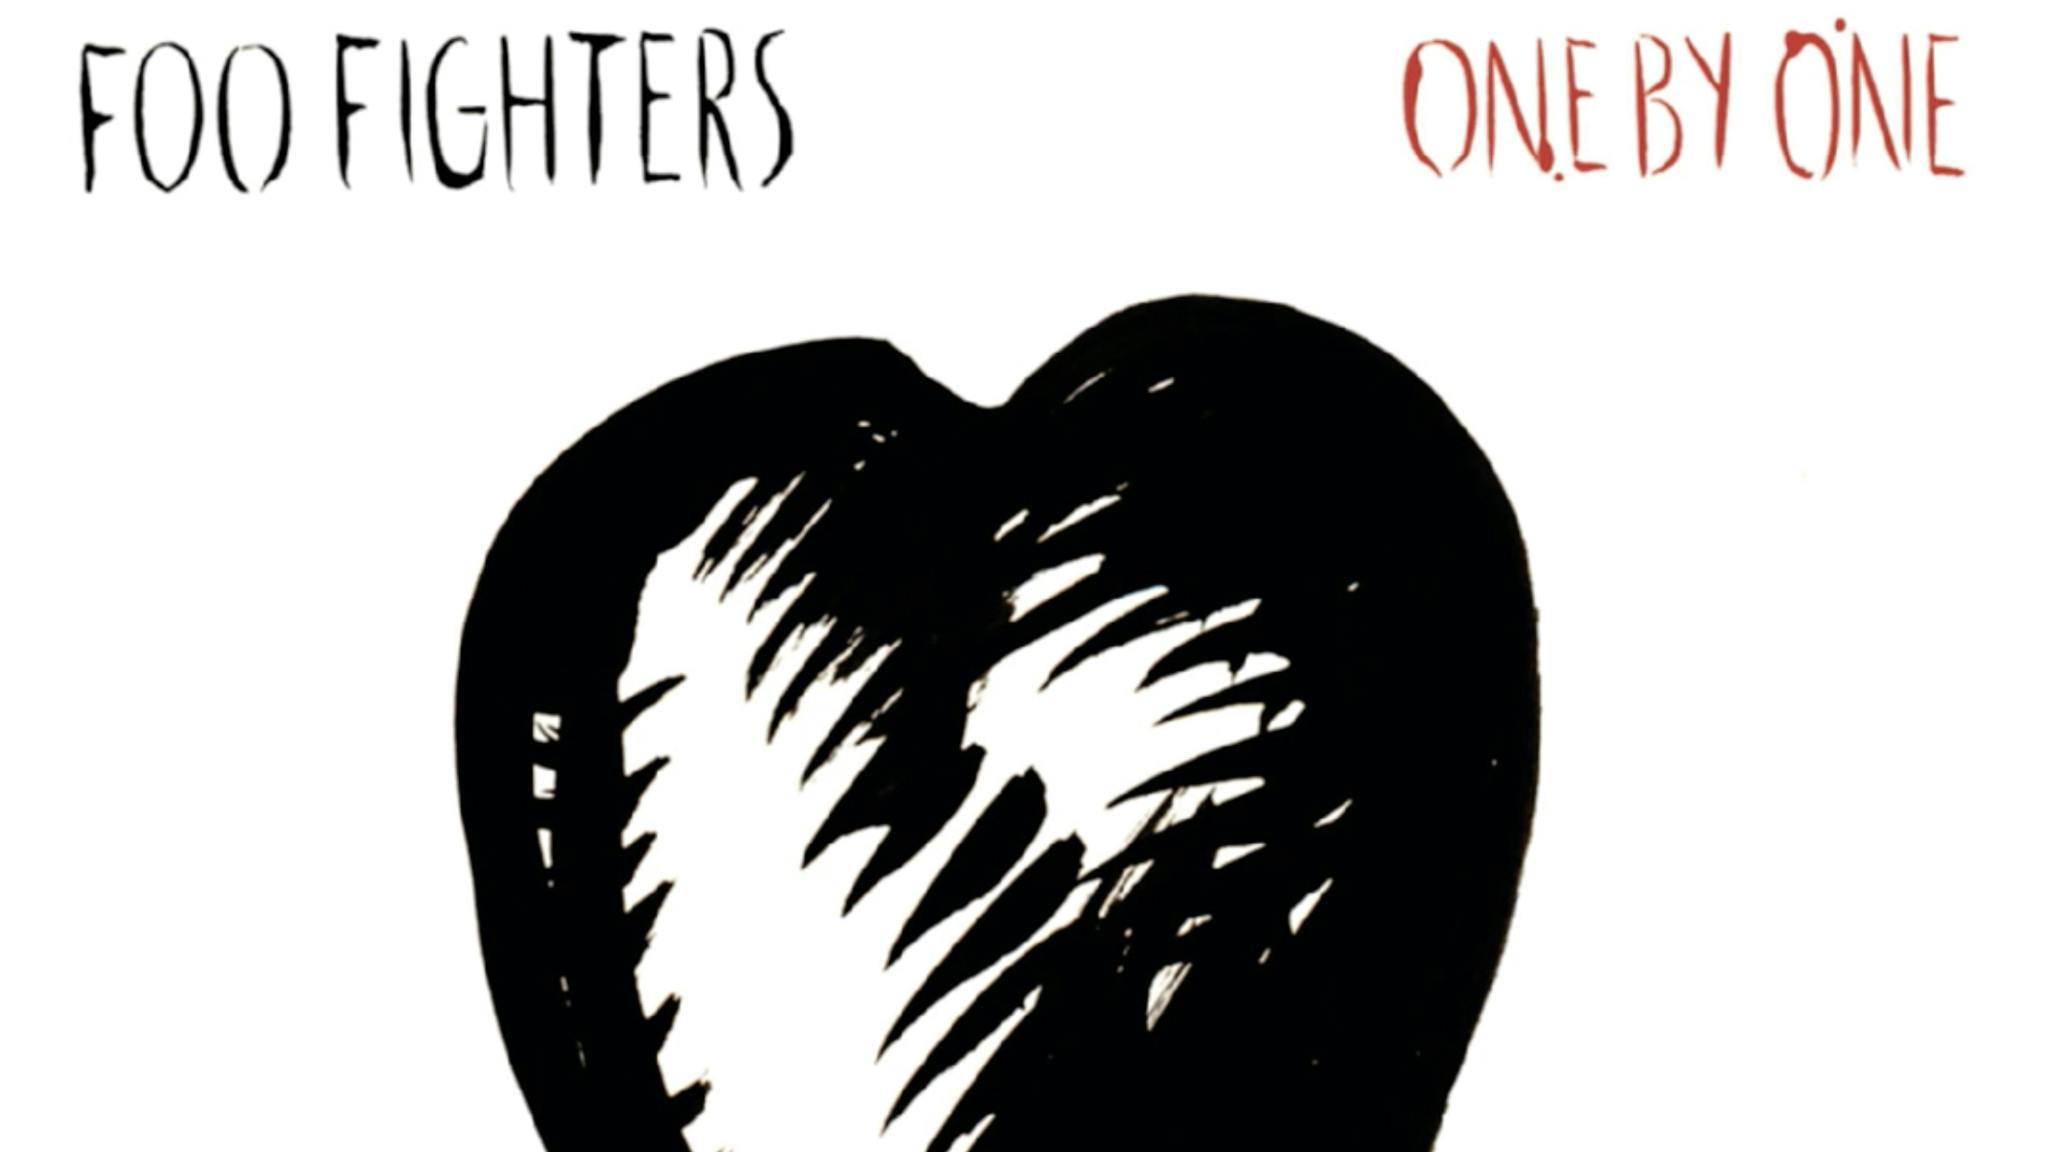 “I don’t consider it to be our proudest moment”: The story of Foo Fighters’ One By One